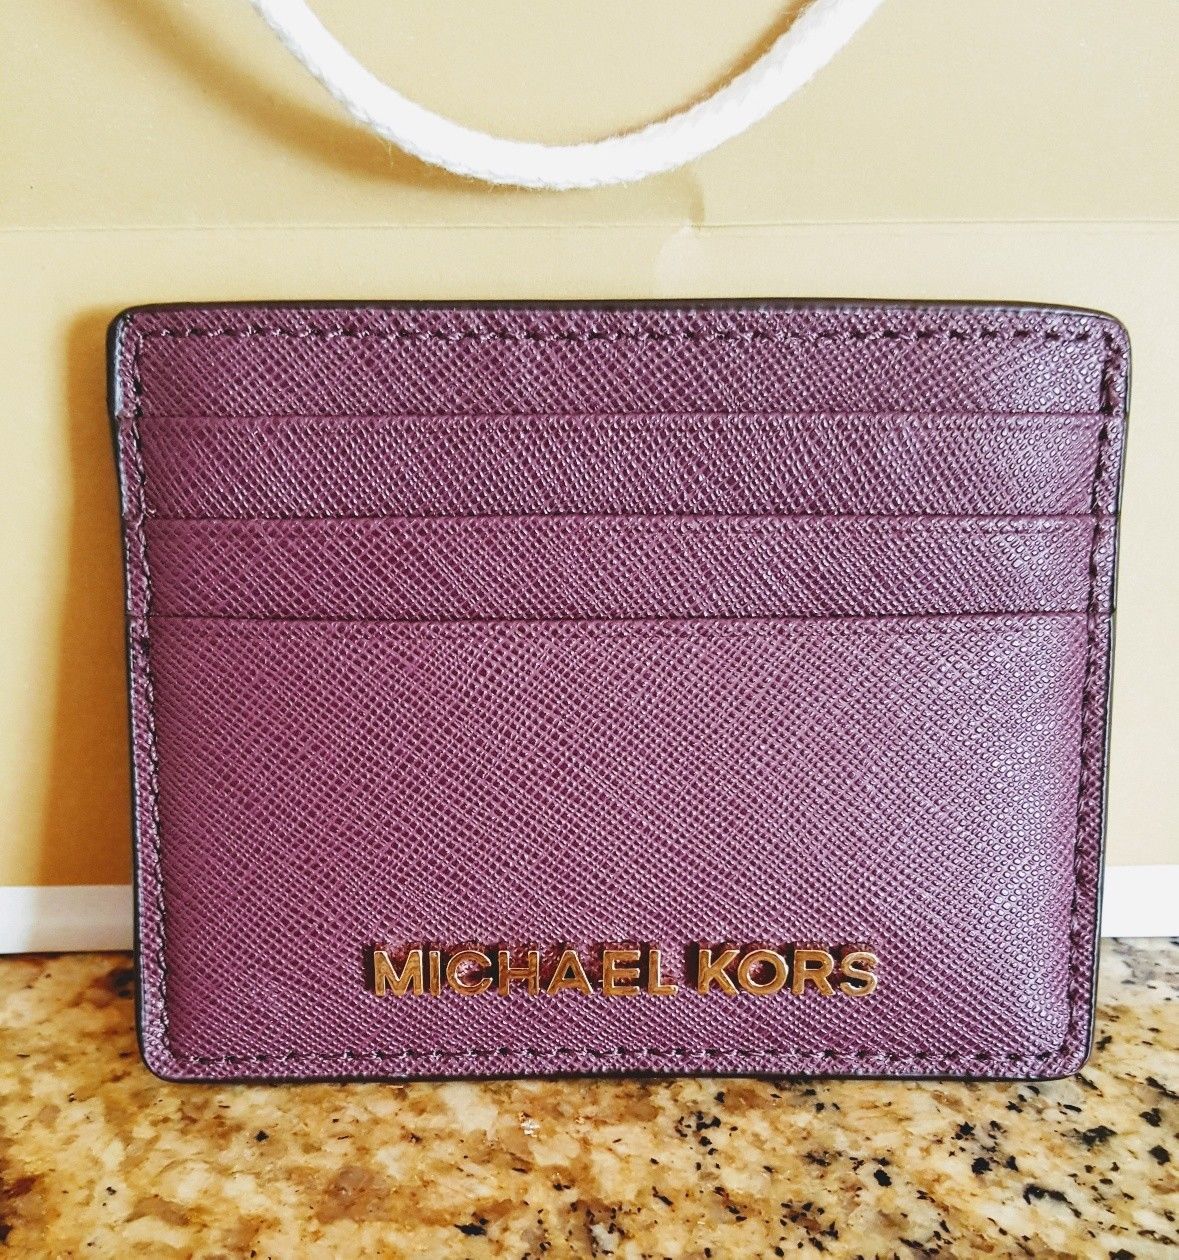 MICHAEL KORS Small Red Leather Wallet Card Case EUC